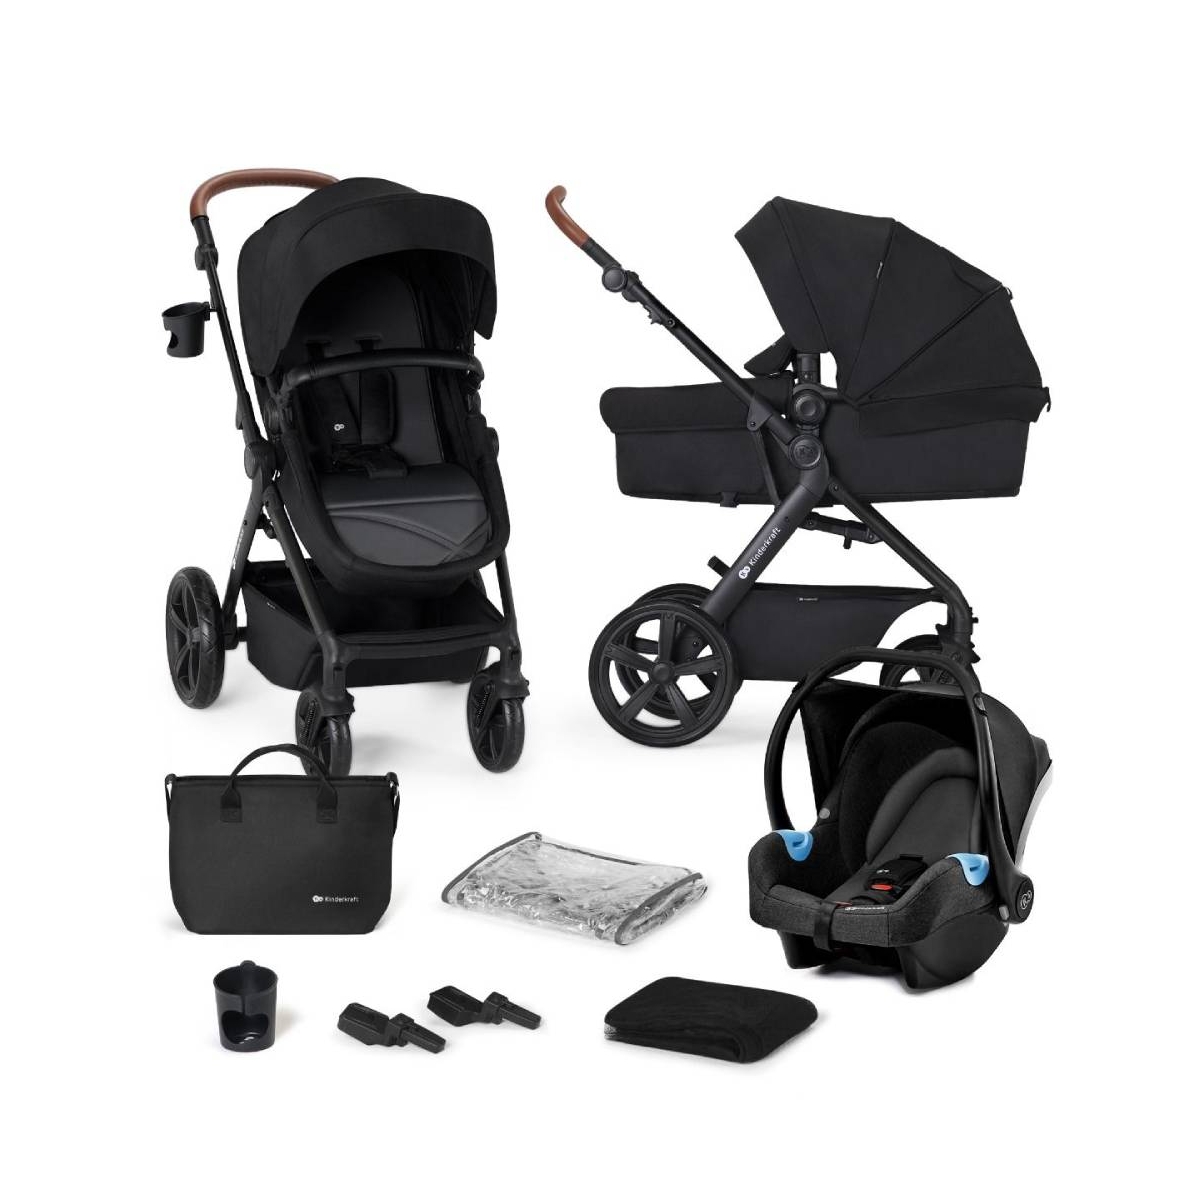 Kinderkraft A-Tour 3in1 with Mink Car Seat Travel System